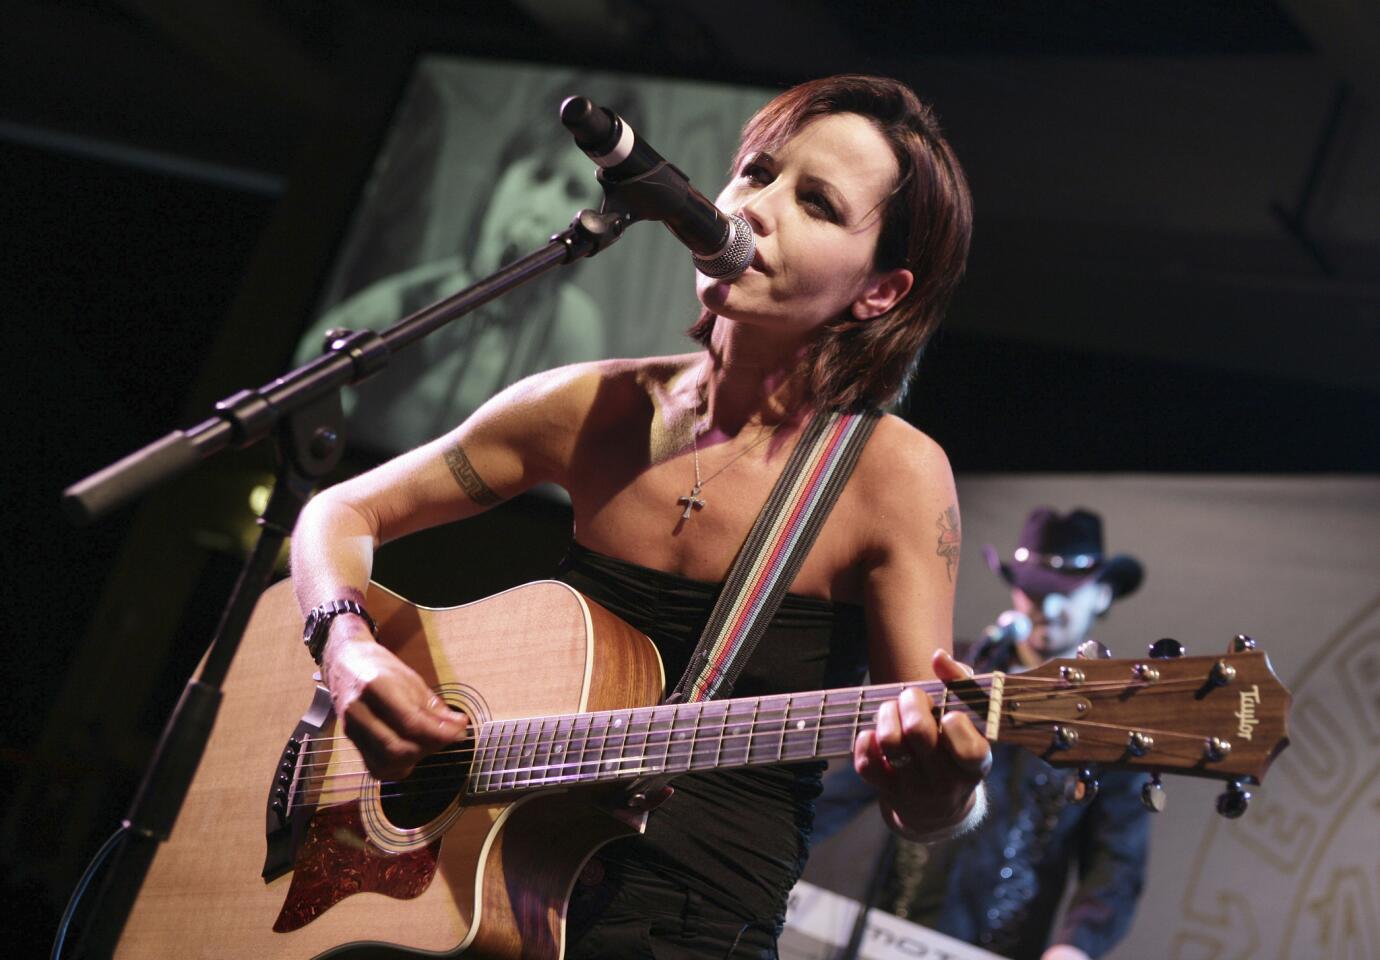 Cranberries lead singer Dolores O'Riordan performs during the European Border Breakers awards in Cannes, France, in 2008. O'Riordan, lead singer of Irish band the Cranberries, has died. She was 46.